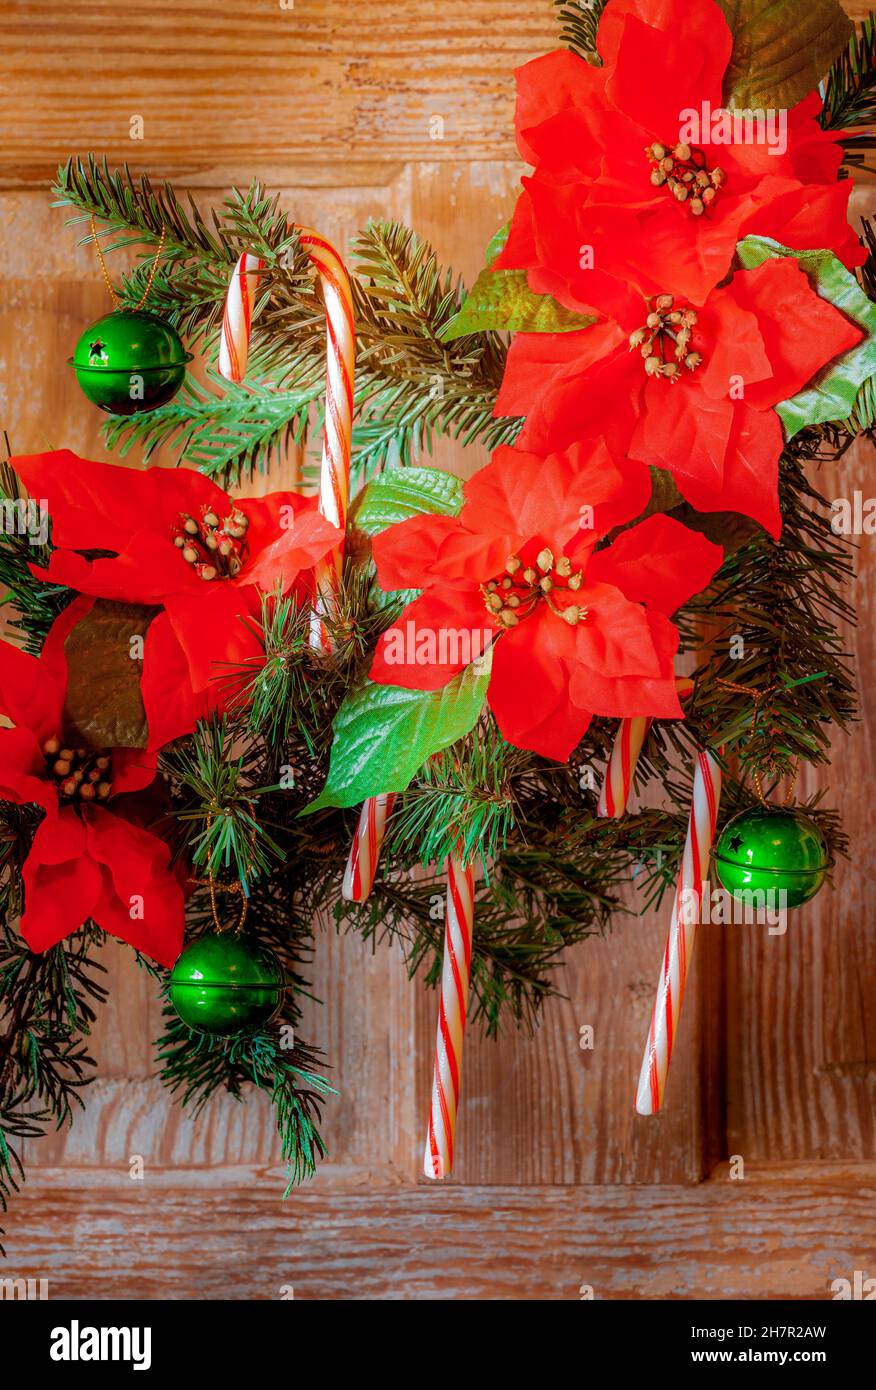 Jingle bells and red and white striped candy canes hang on Christmas tree branch with red Poinsettias. Stock Photo